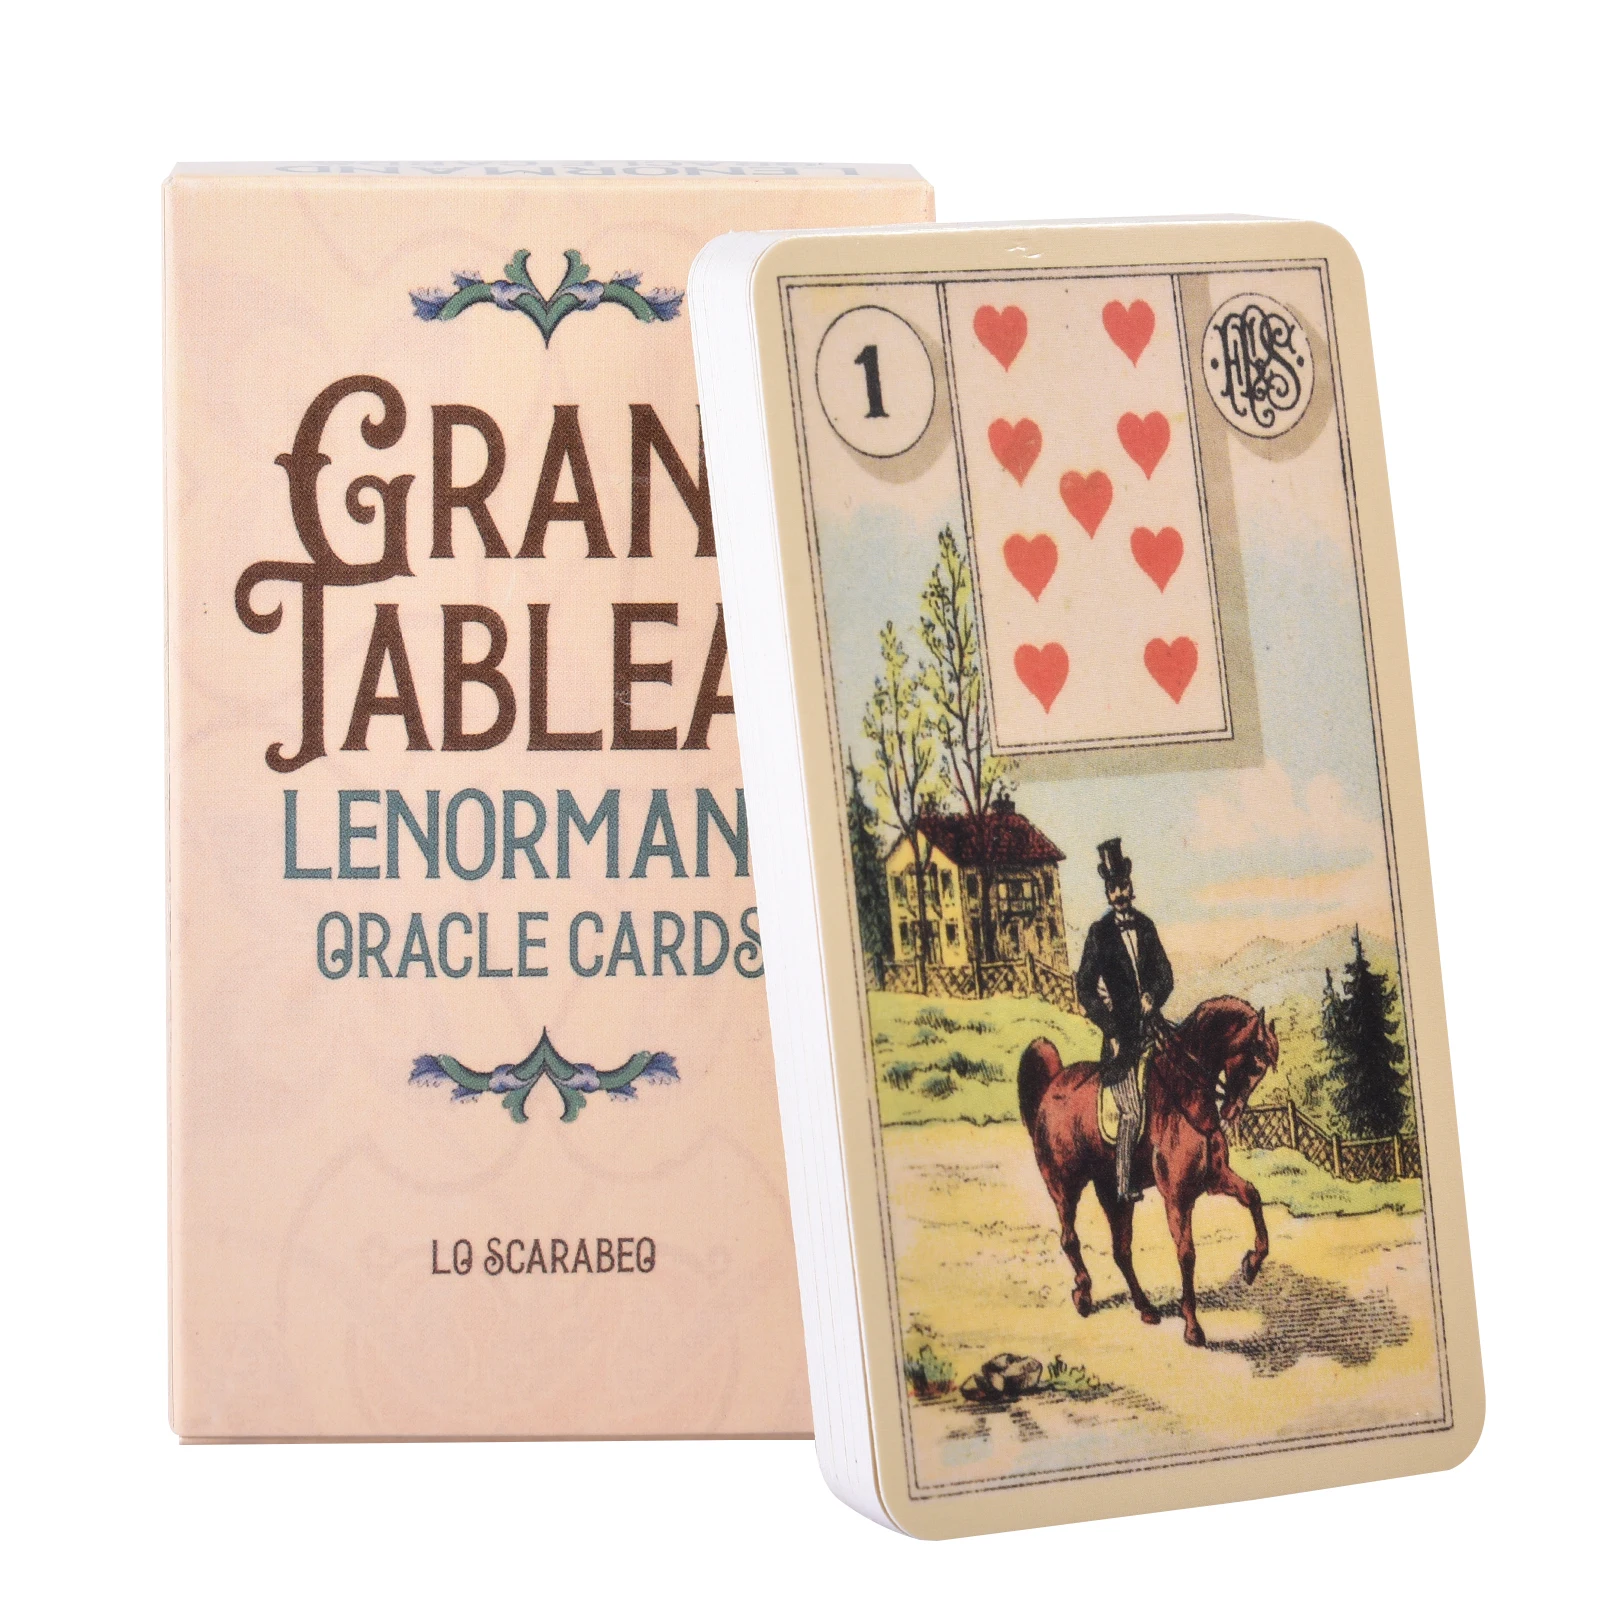 New 2022 36 Grand Tableau Lenormand 36 Full-Color Tarot Cards And  Instructions Replicas Of Lenormand's